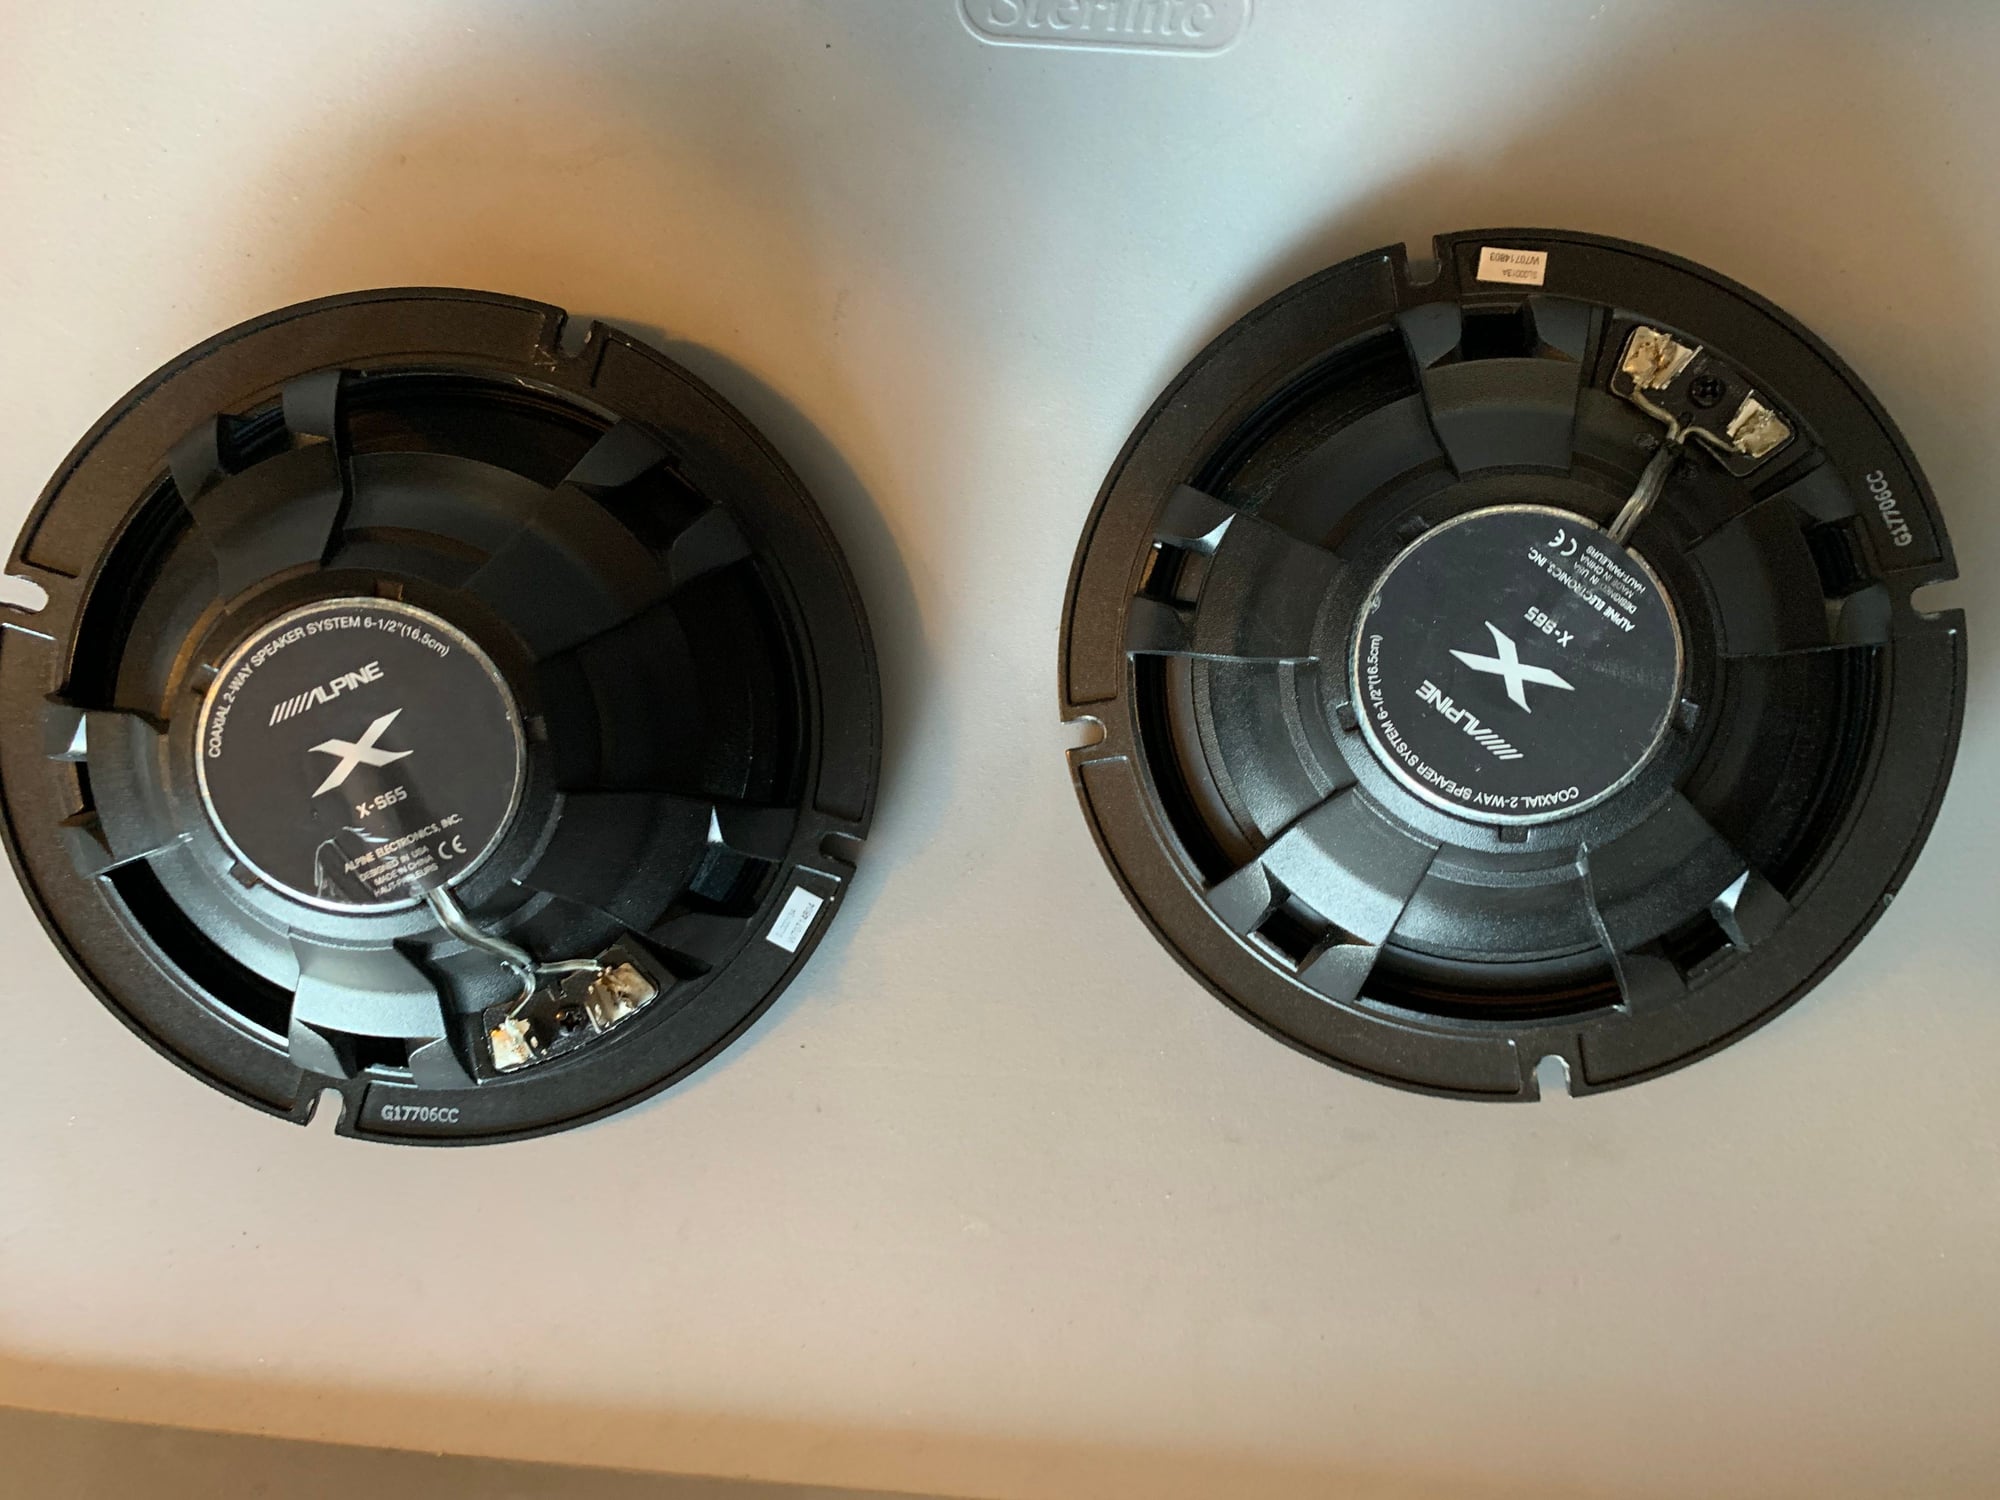 Audio Video/Electronics - Alpine X Series Speakers - Used - All Years Any Make All Models - Ogden, UT 84401, United States